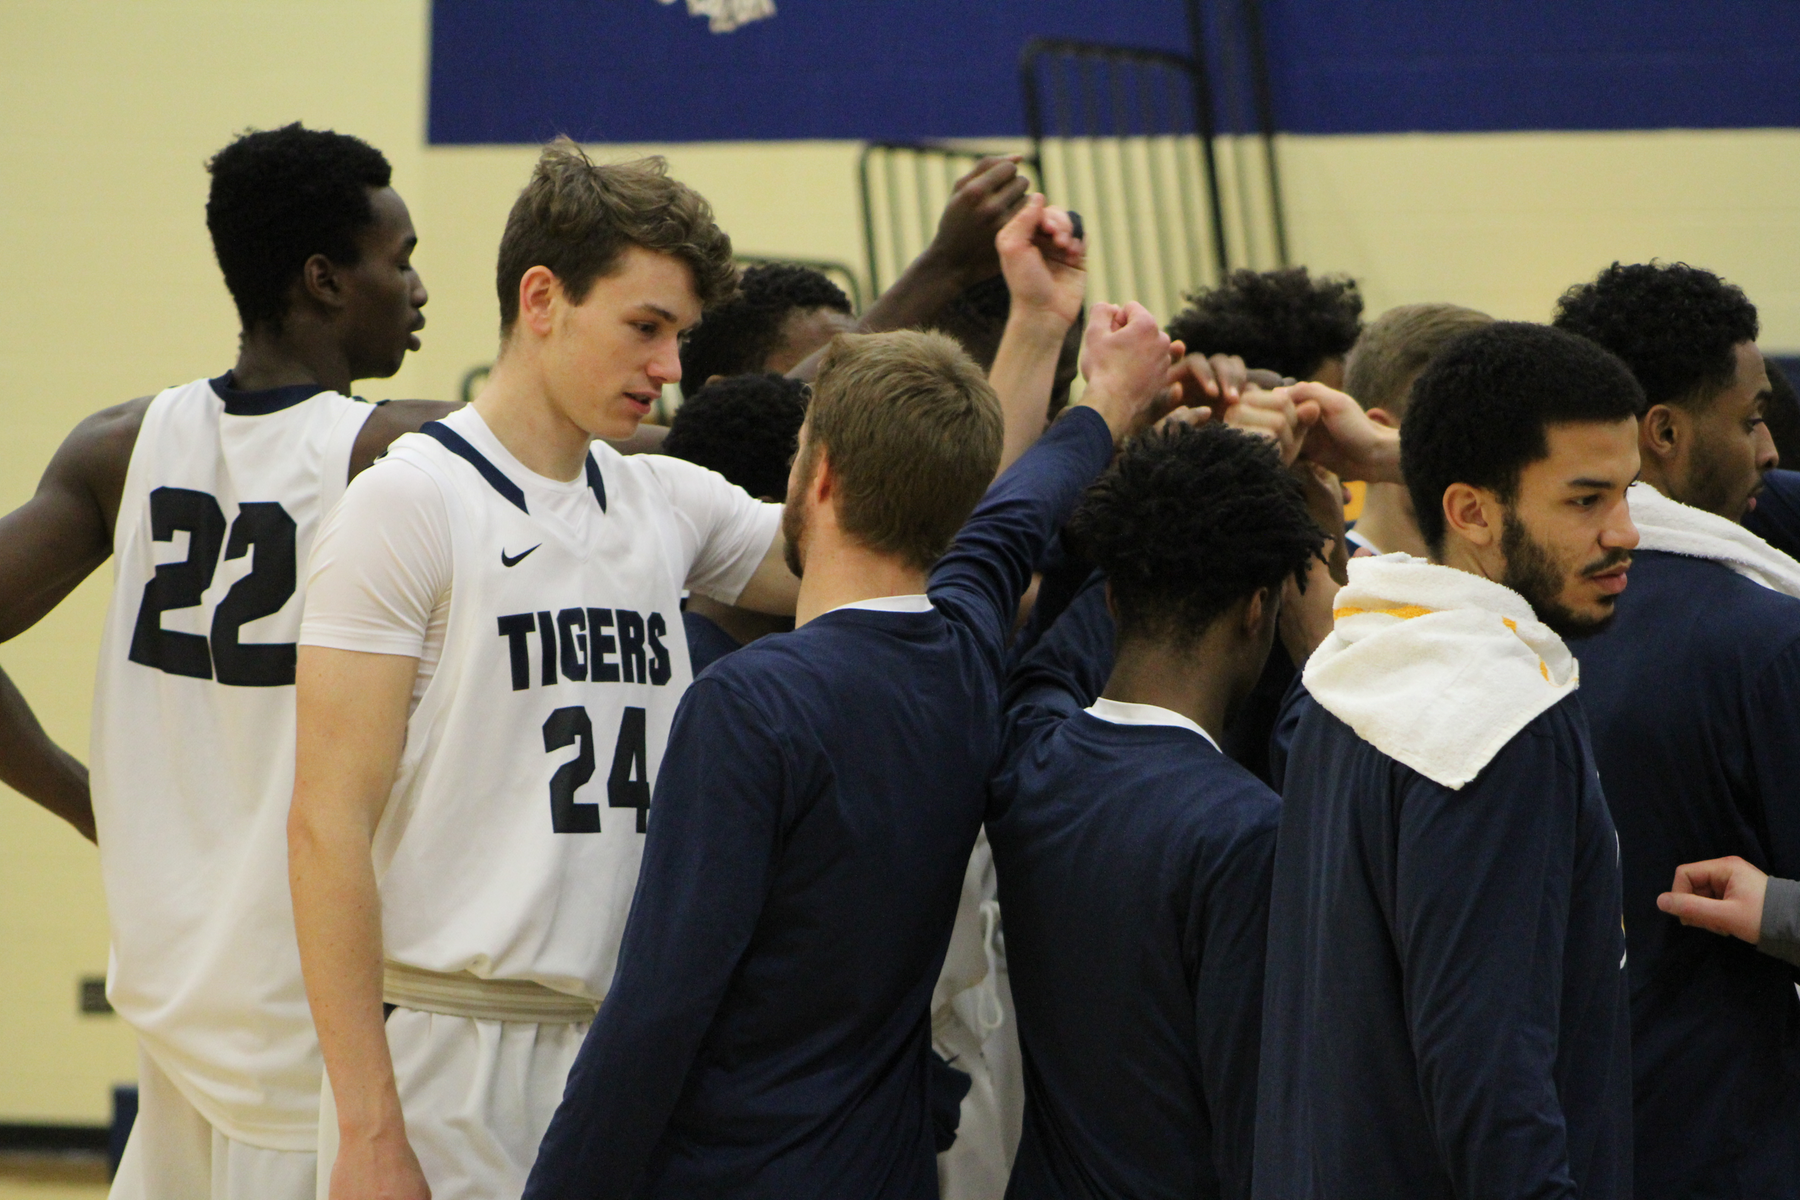 Tigers roll Graceland JV to improve to 9-2